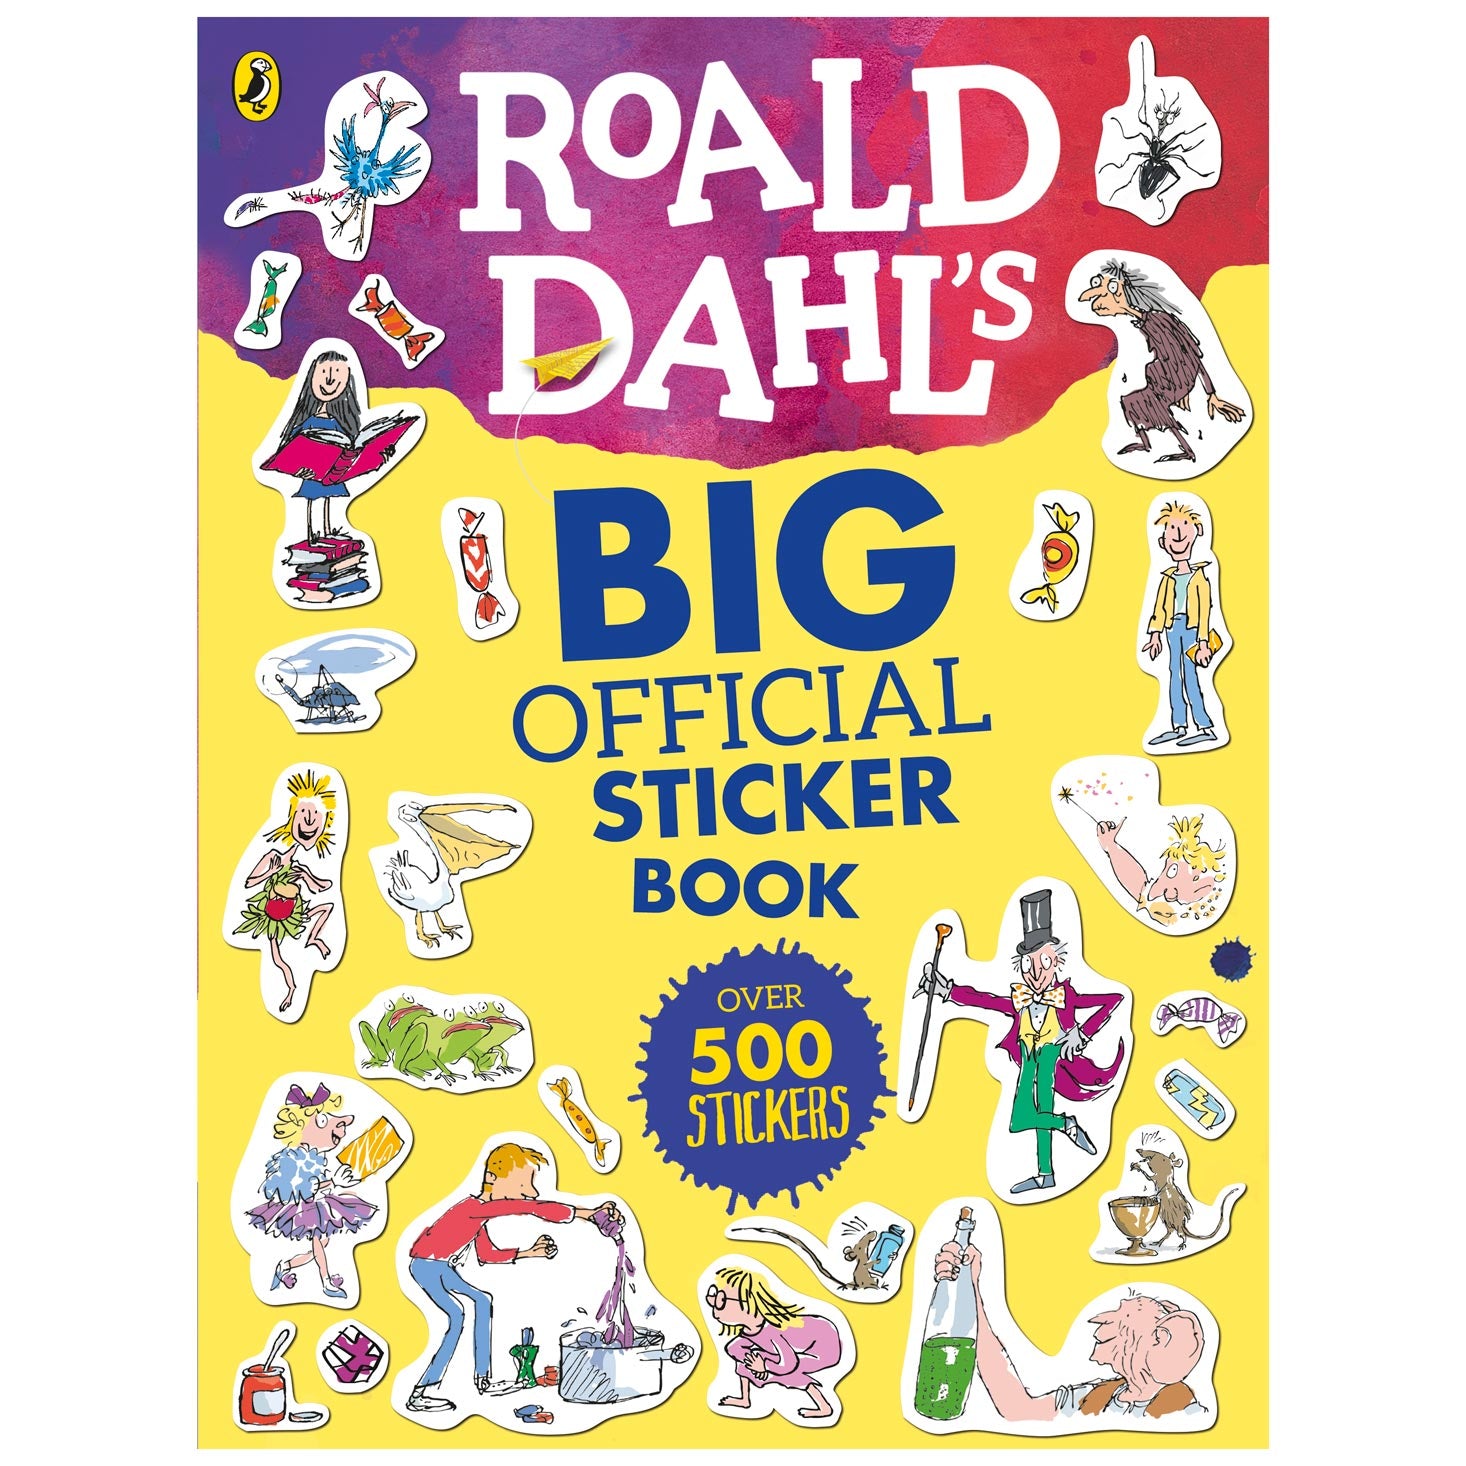 Roald Dahl's Big Official Sticker Book illustrated by Quentin Blake